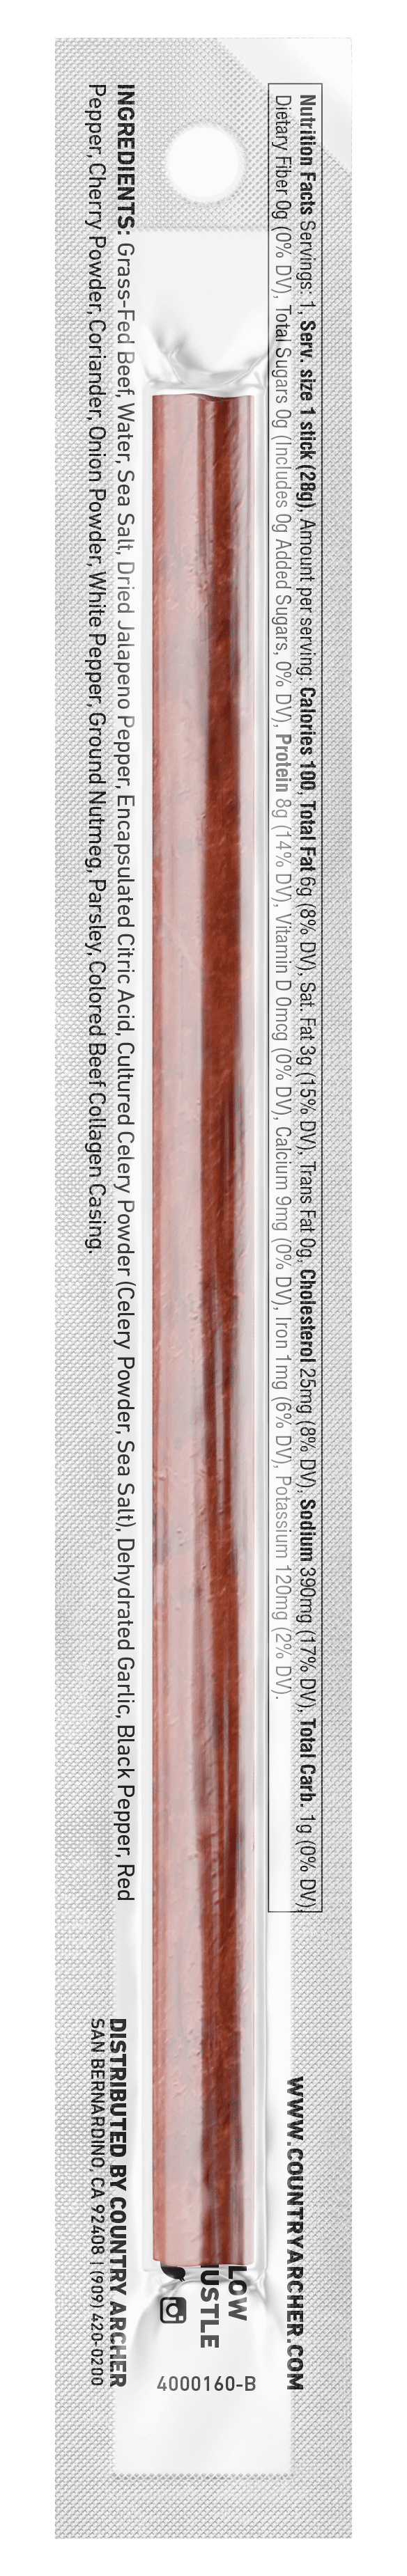 Country Archer Jalapeno grass-fed beef stick back of package